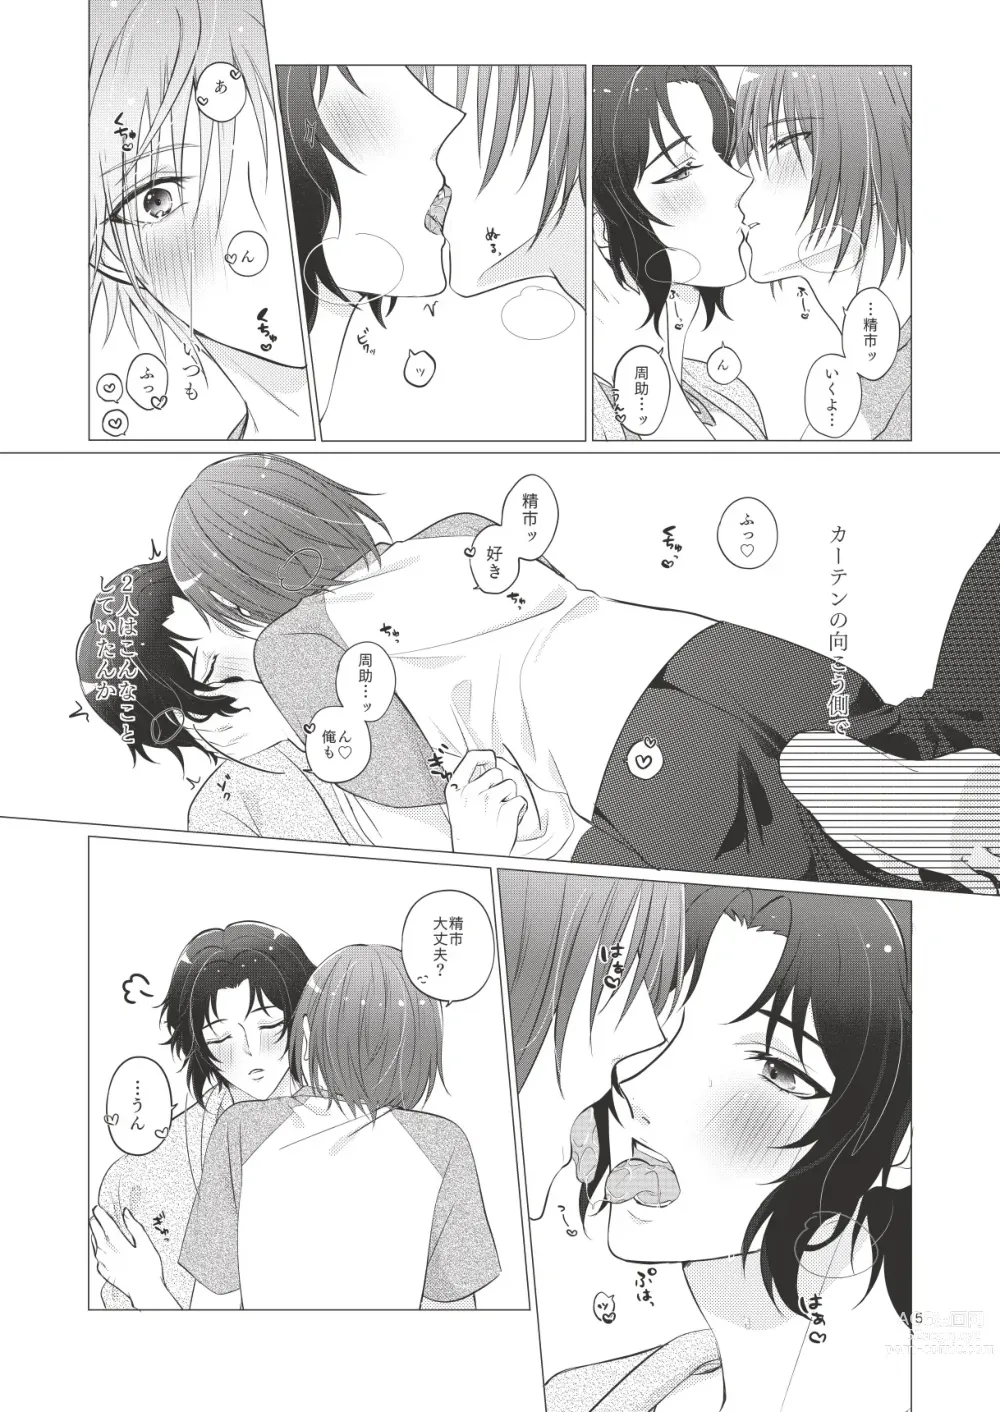 Page 4 of doujinshi Bonds of affection